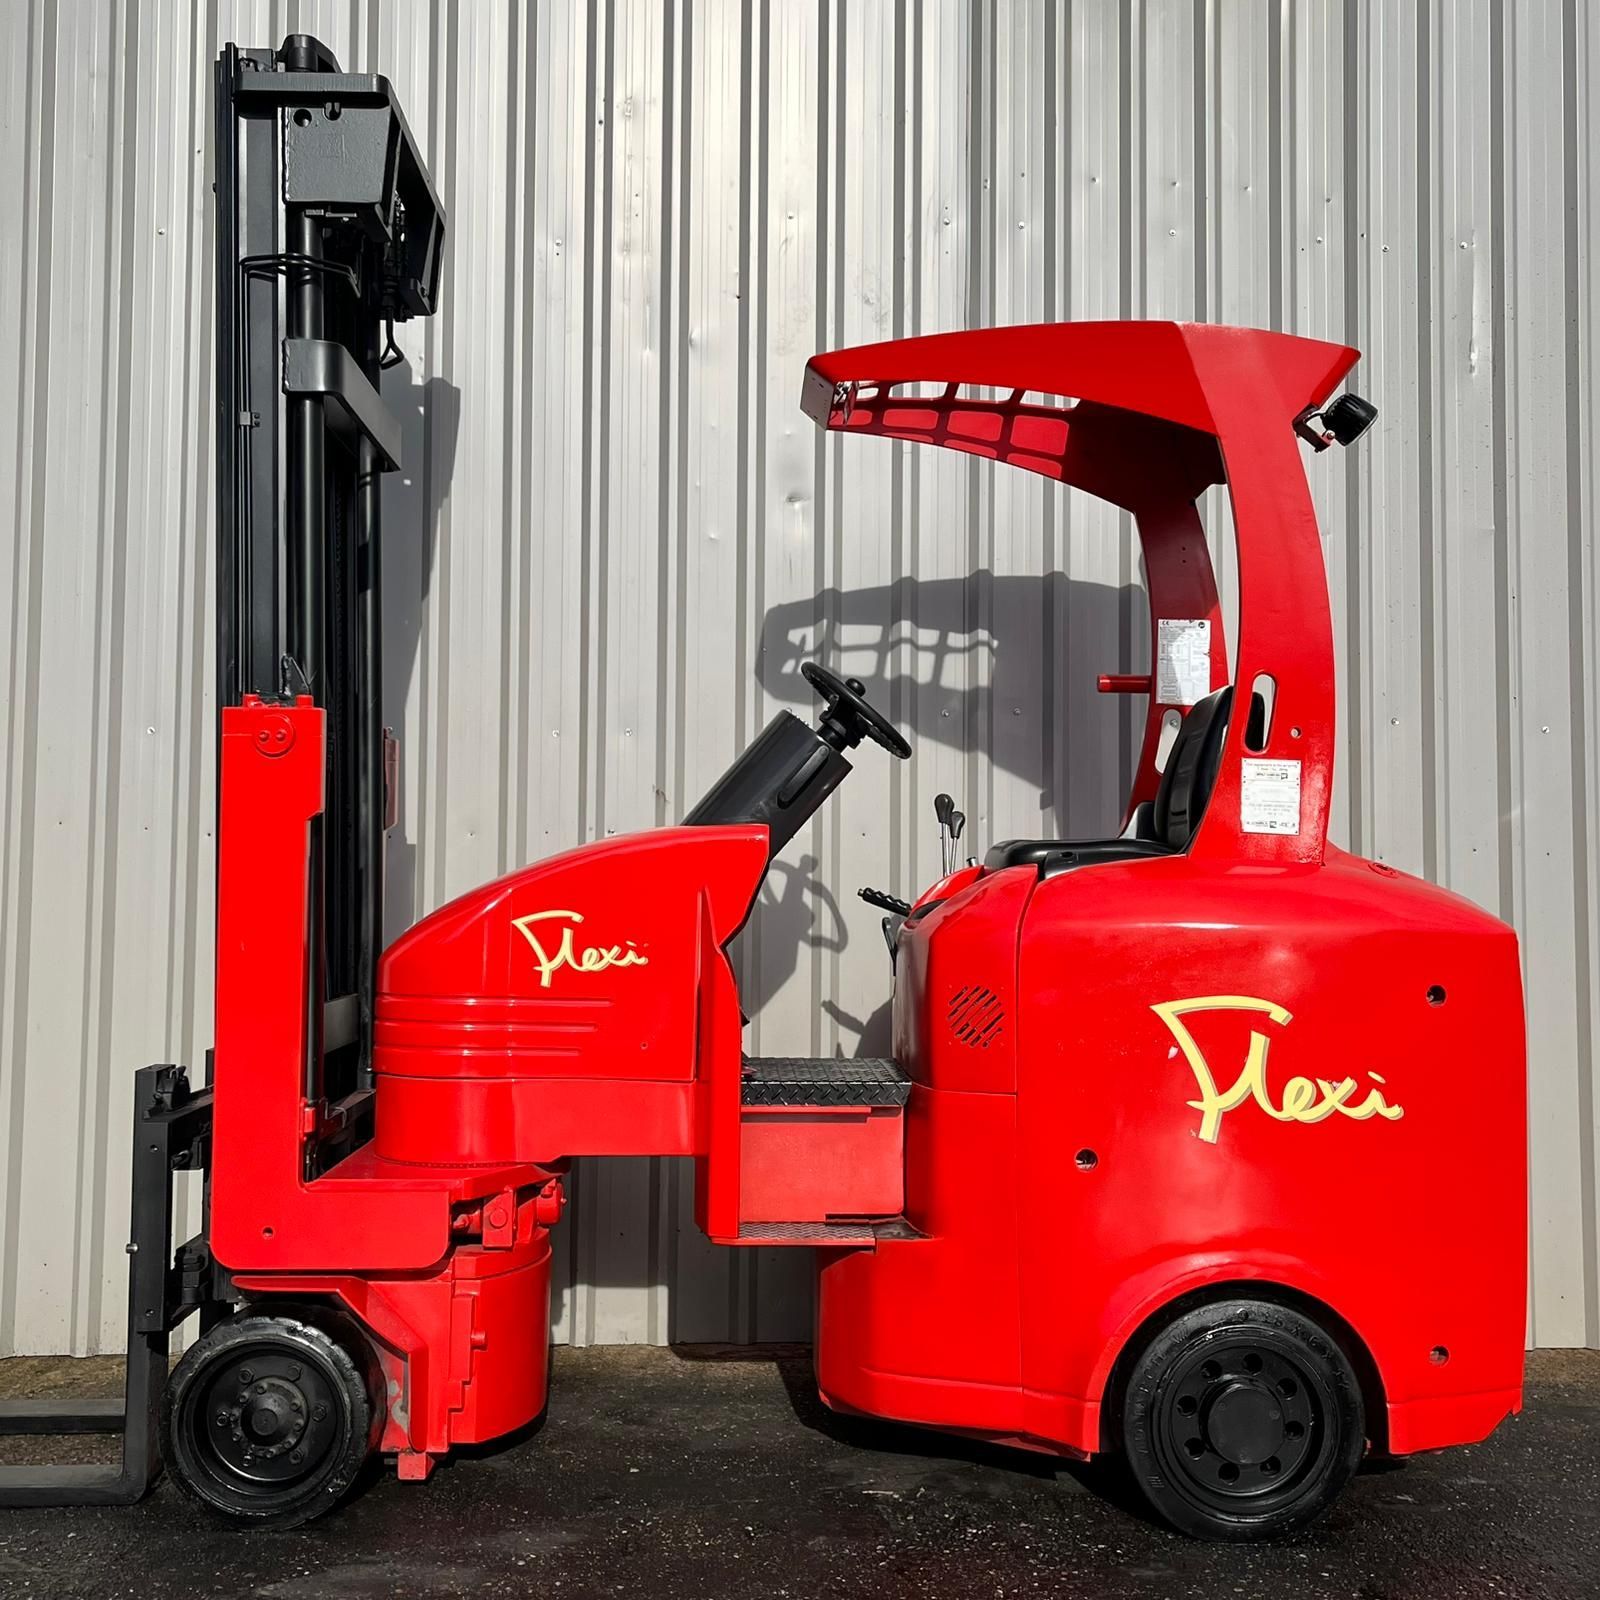 A red flexi forklift is parked in front of a building